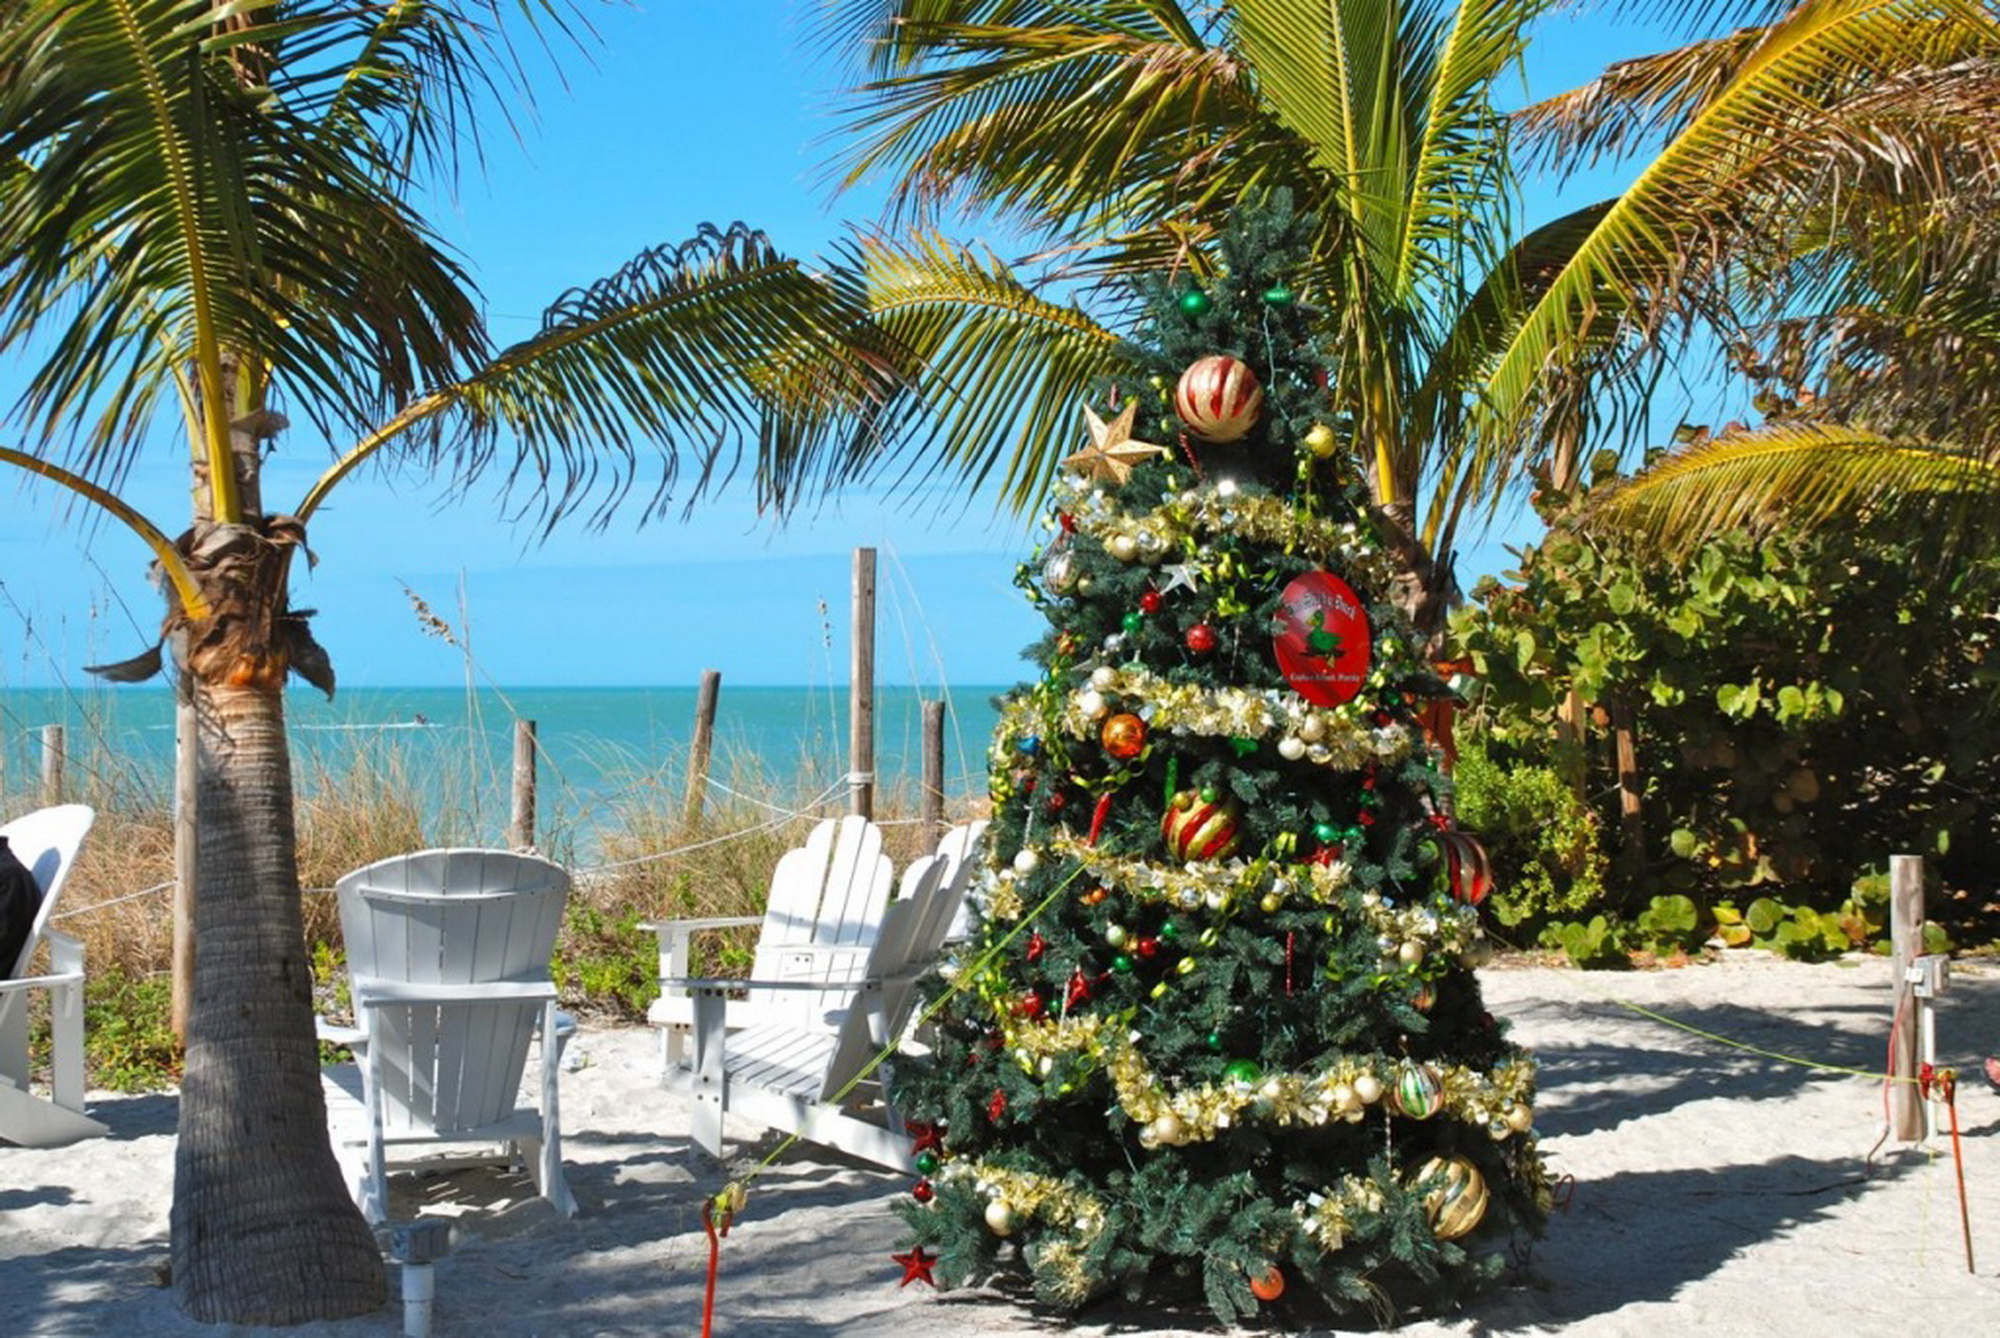 South Florida Vacation Rental Accommodations During The Holidays 4 AIRbnb South Florida Injury Law Firm